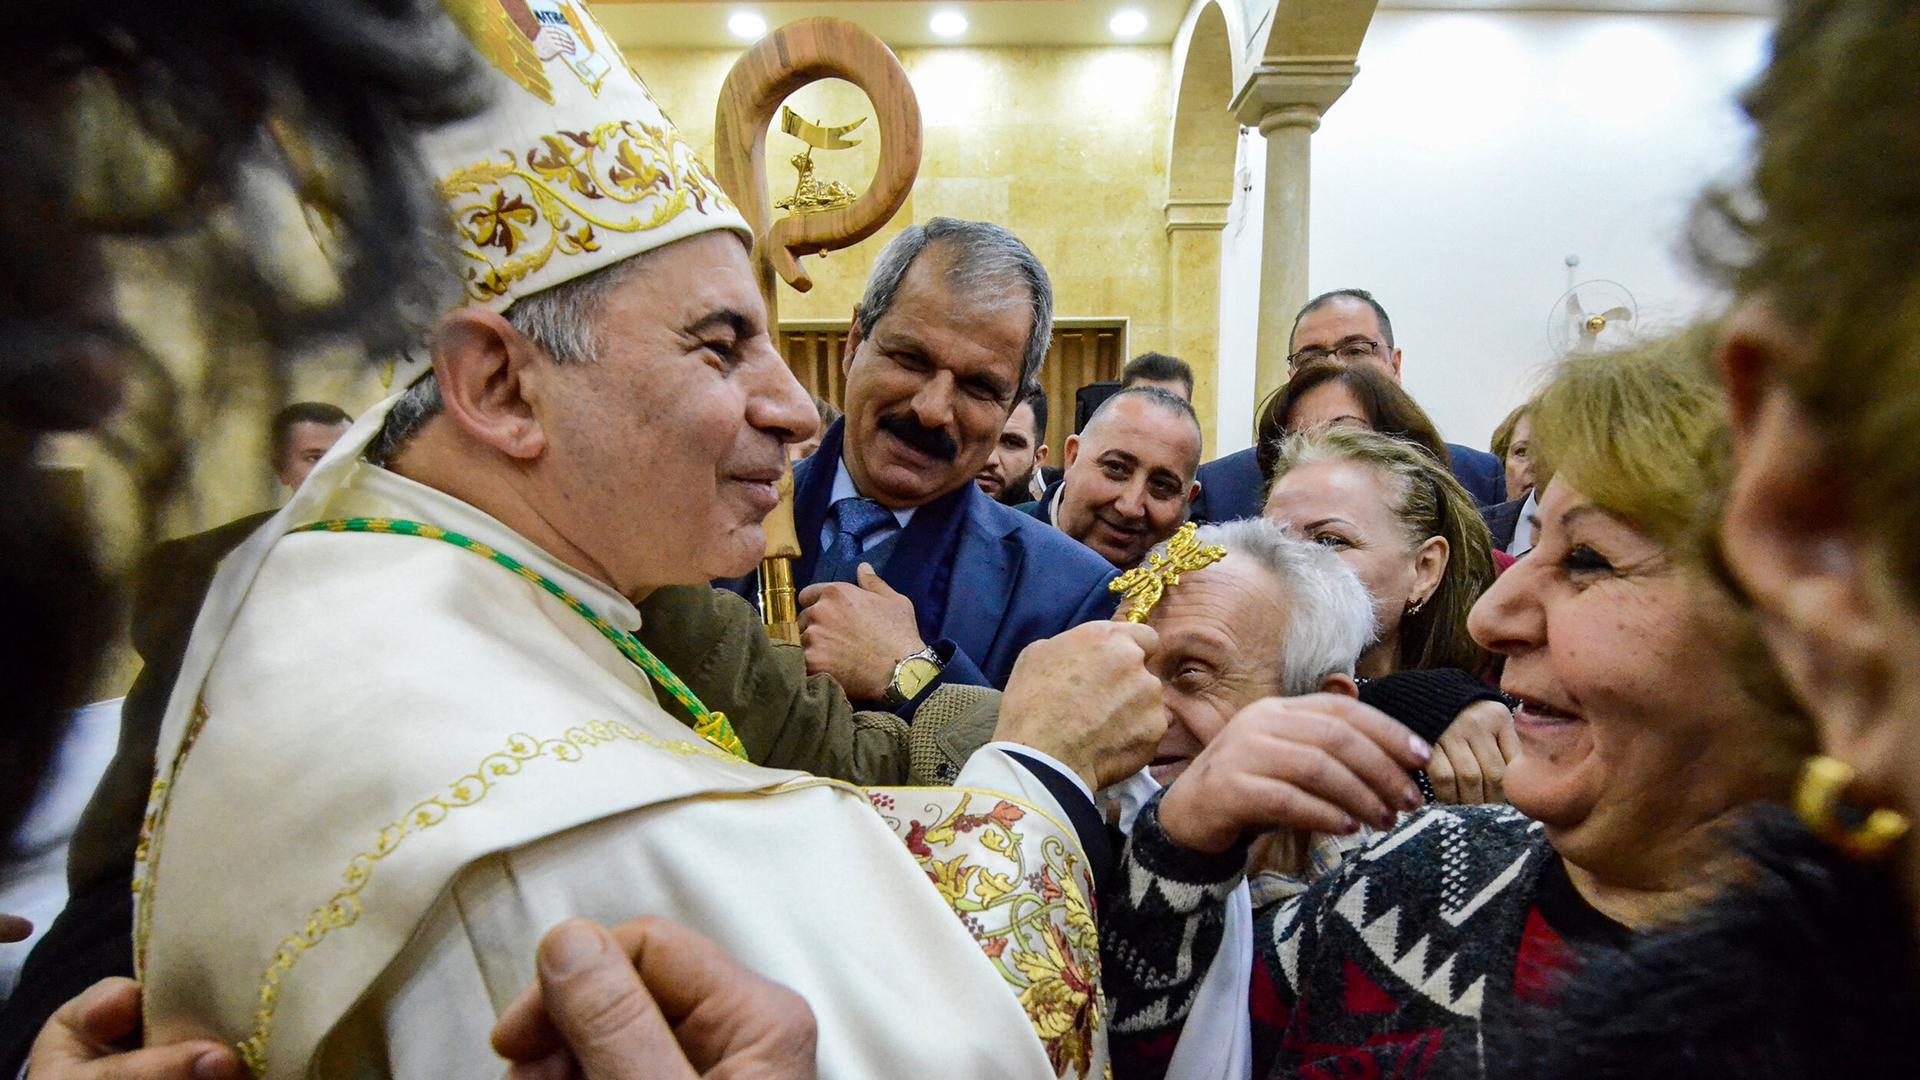 An archbishop blesses a man with his golden cross 